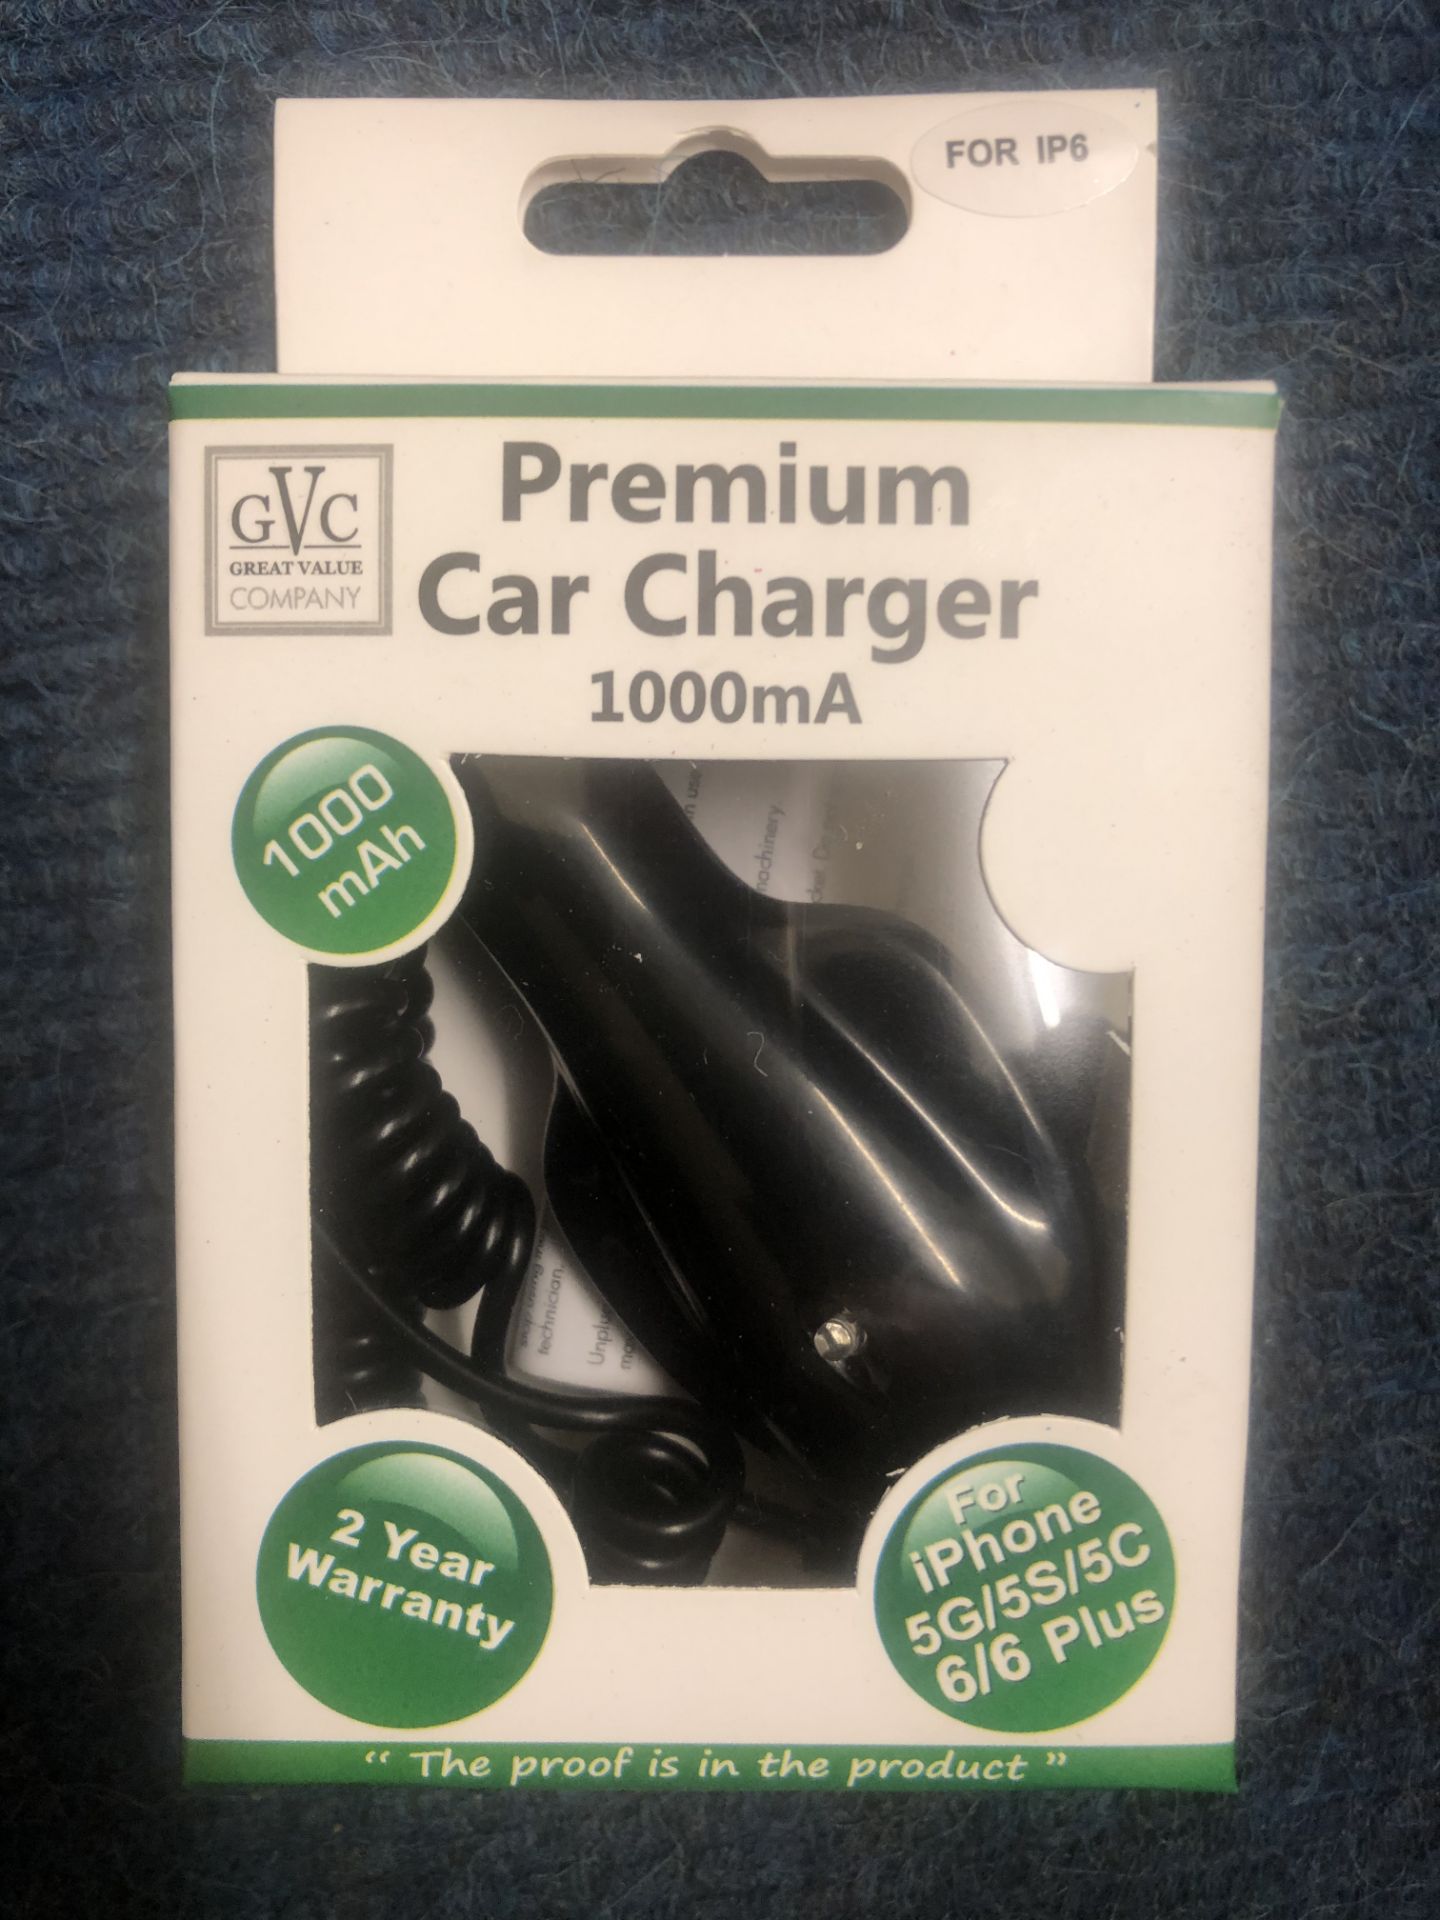 100 x GVC 1000mA Car Charger For Current Apple Devices